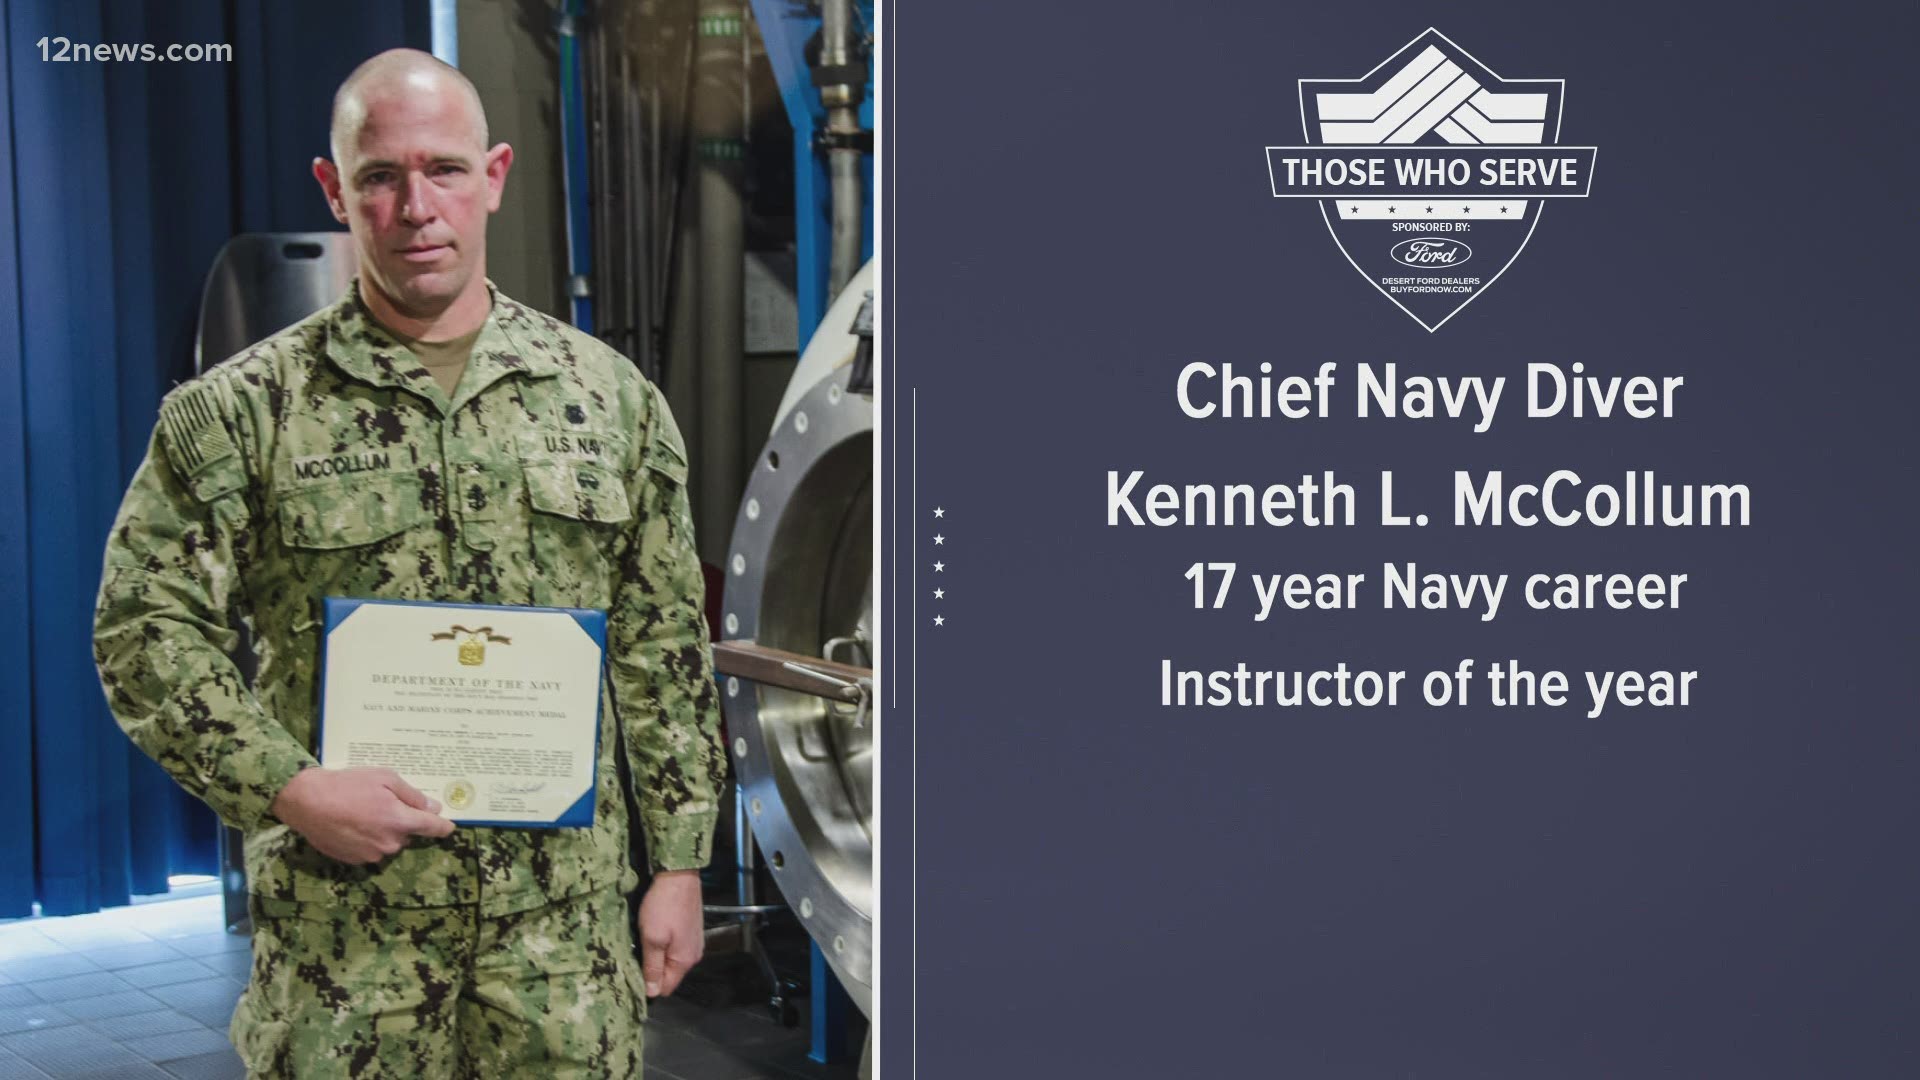 This week, we take a moment to honor Chief Navy Diver Kenneth L. McCollum.